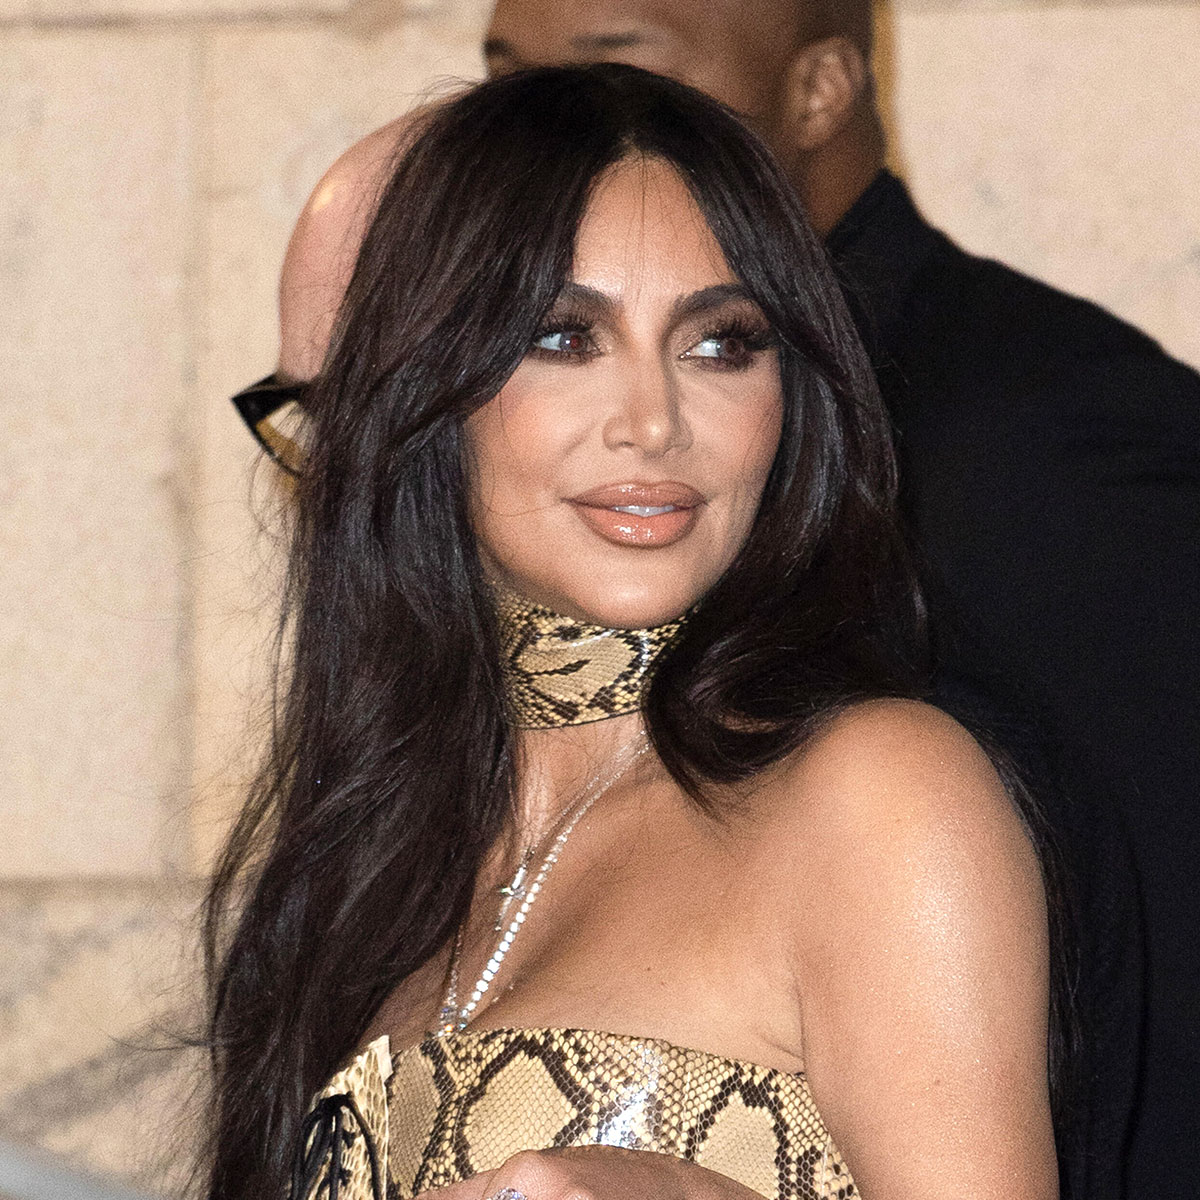 Fans Think Kim Kardashian Looks Like Donatella Versace In New Fashion Week Photos: ‘Her Face Changes Faster Than The Weather’